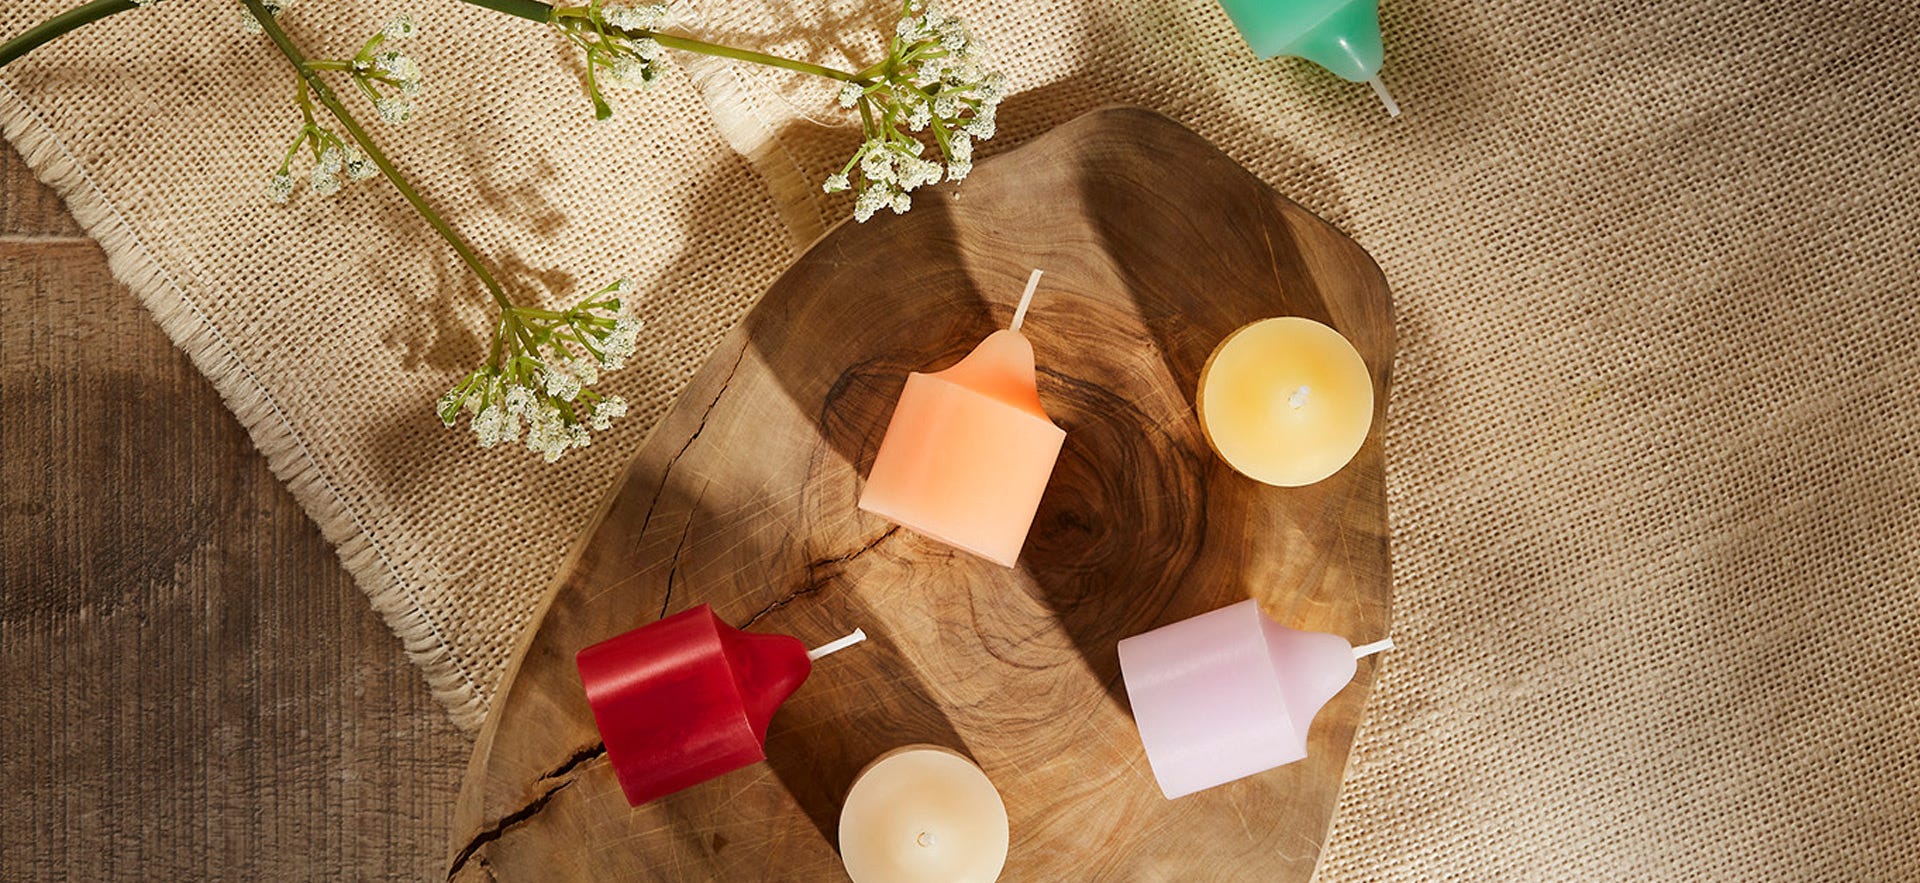 An assortment of votives both standing up and on their side.